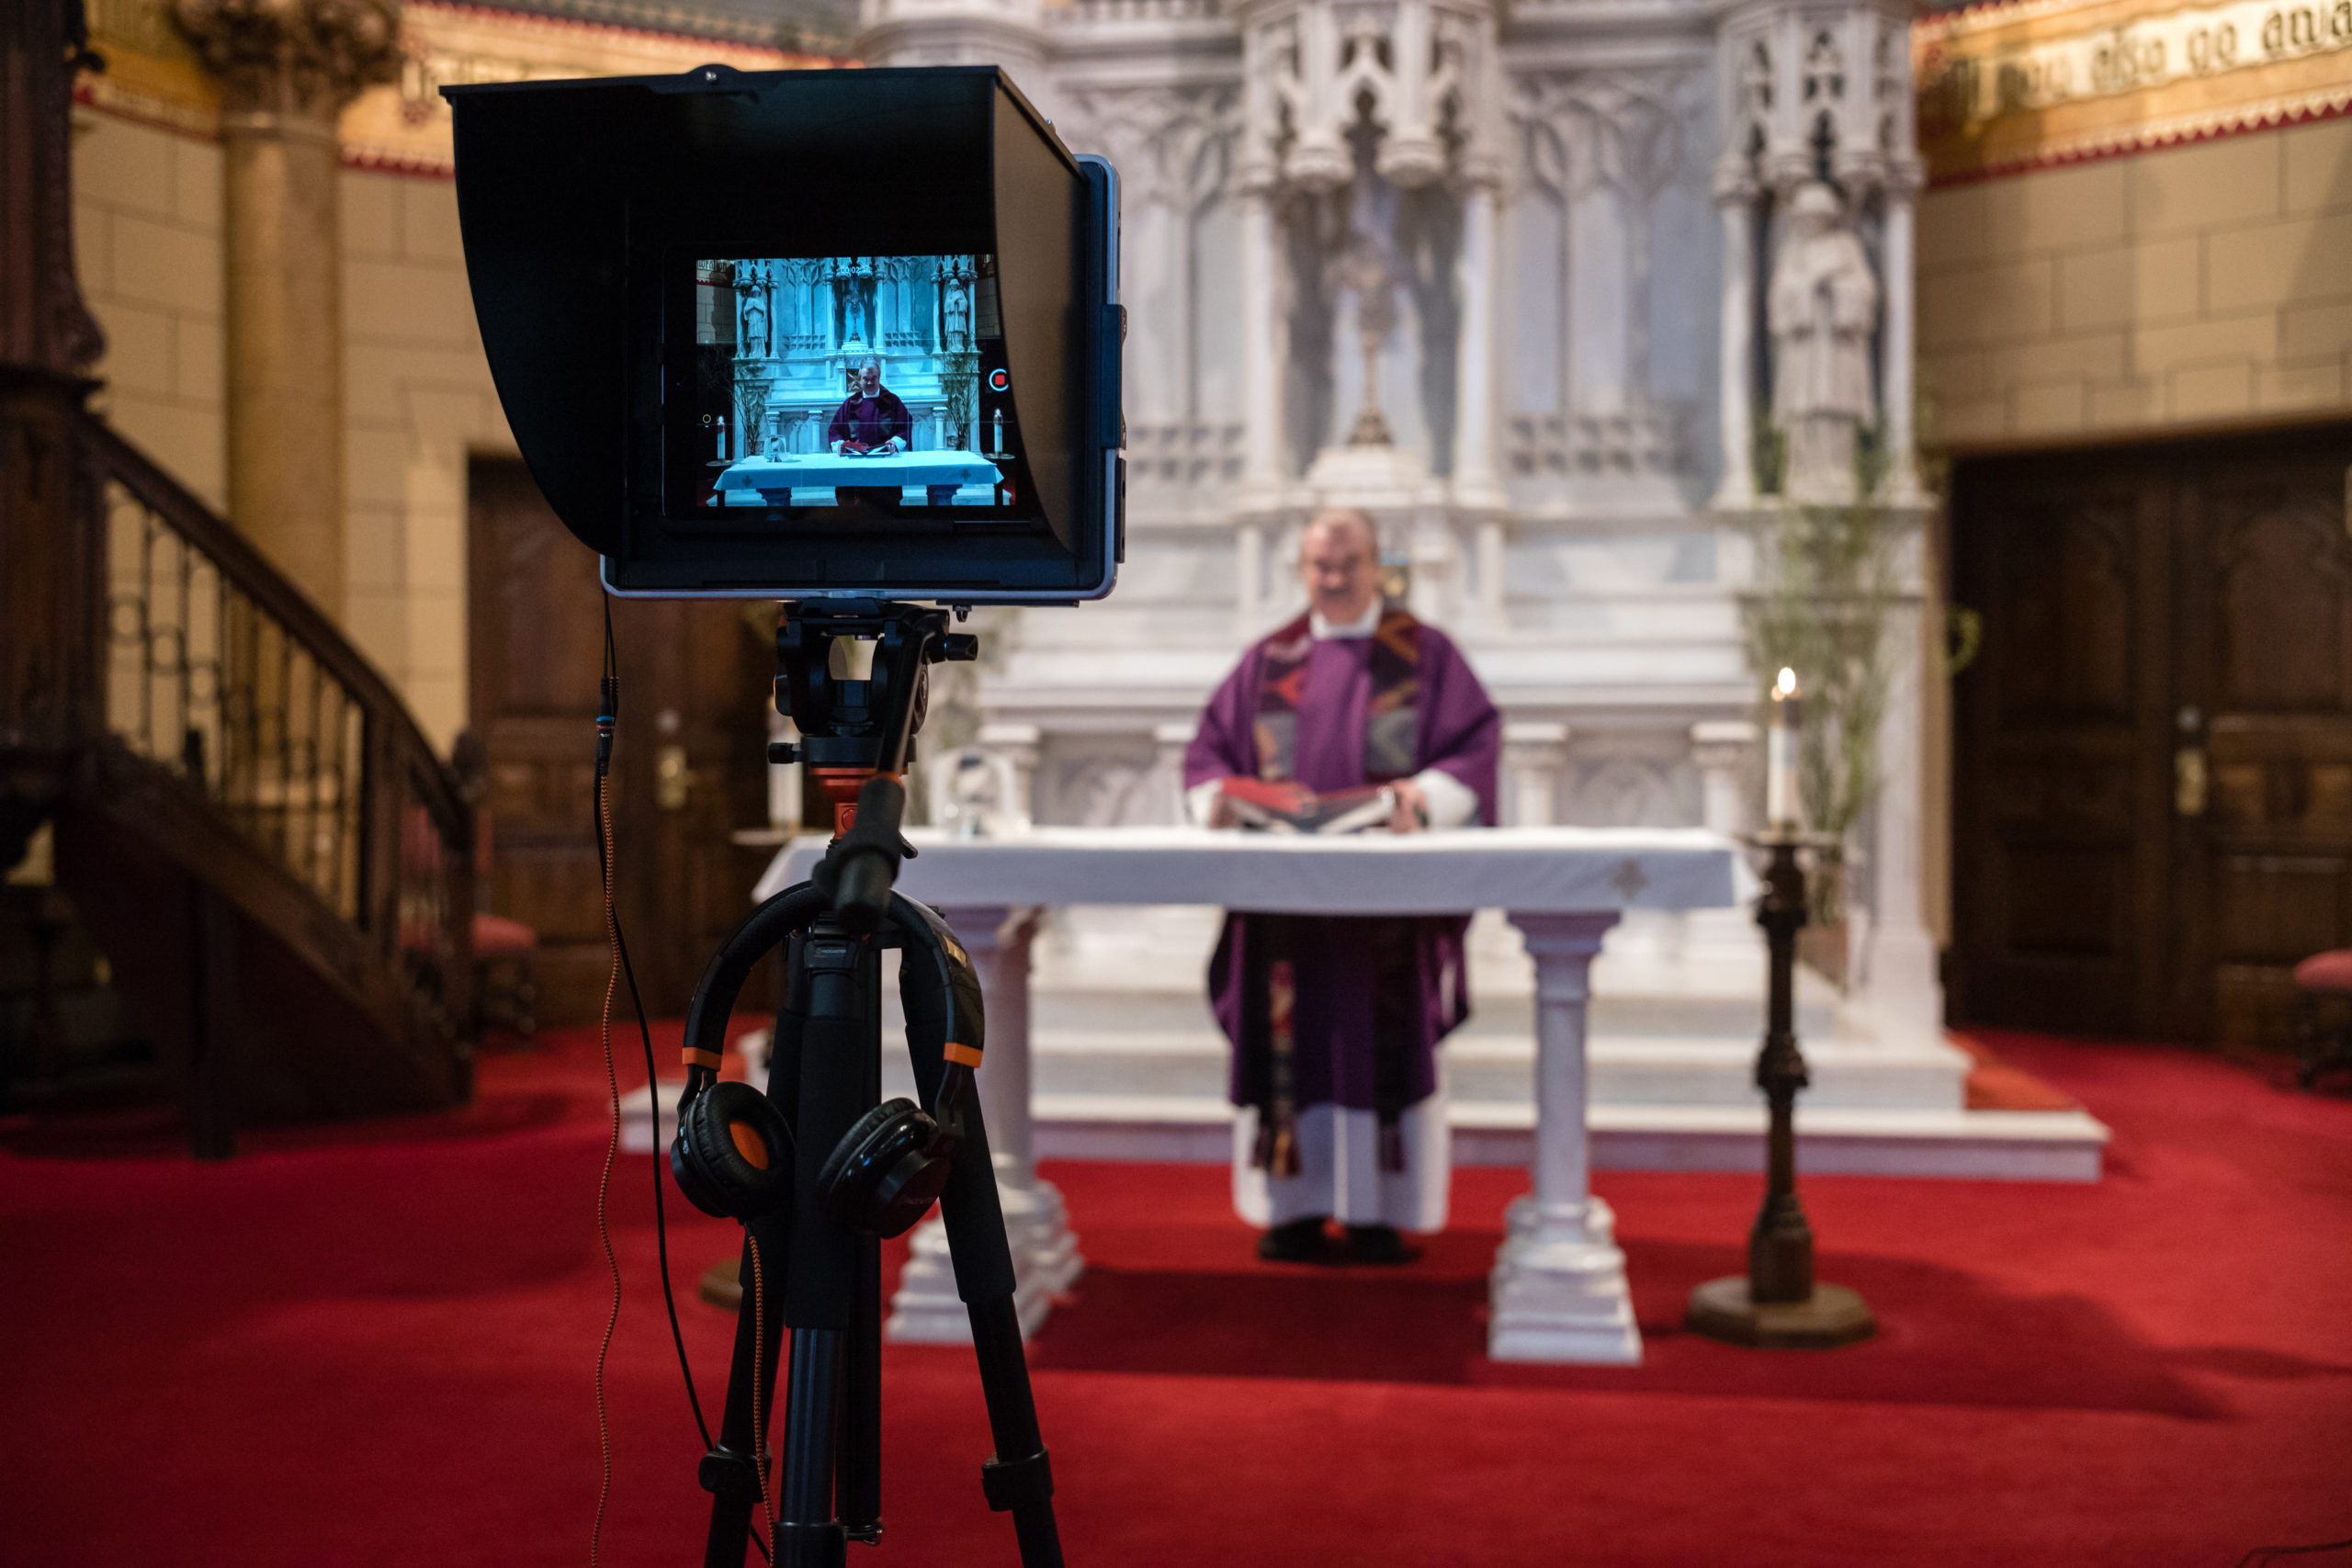 The Basilica Parish of the Sacred Hearts of Jesus and Mary sits empty during the COVID-19 epidemic, but attendance -- by way of the internet -- is up.